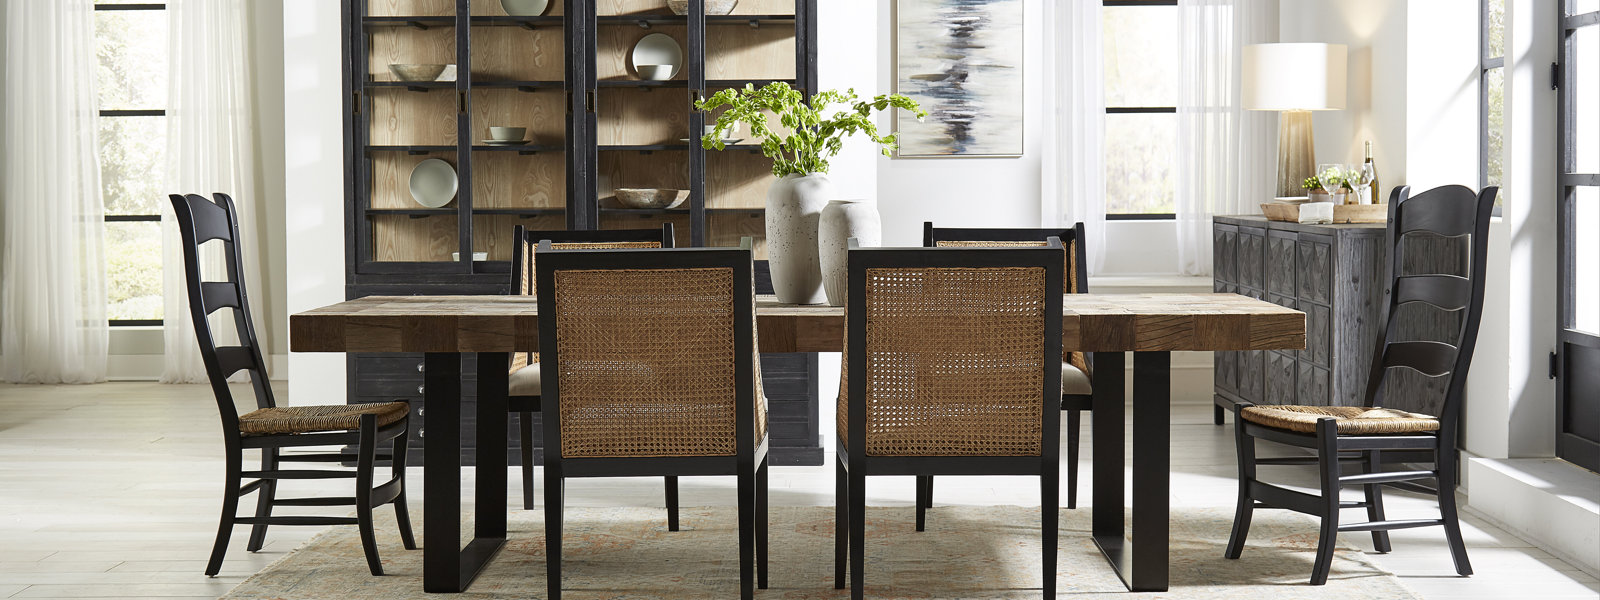 Tan and Black Cane Chairs with Blue Chevron Pillow Top Seat Cushions -  Transitional - Dining Room